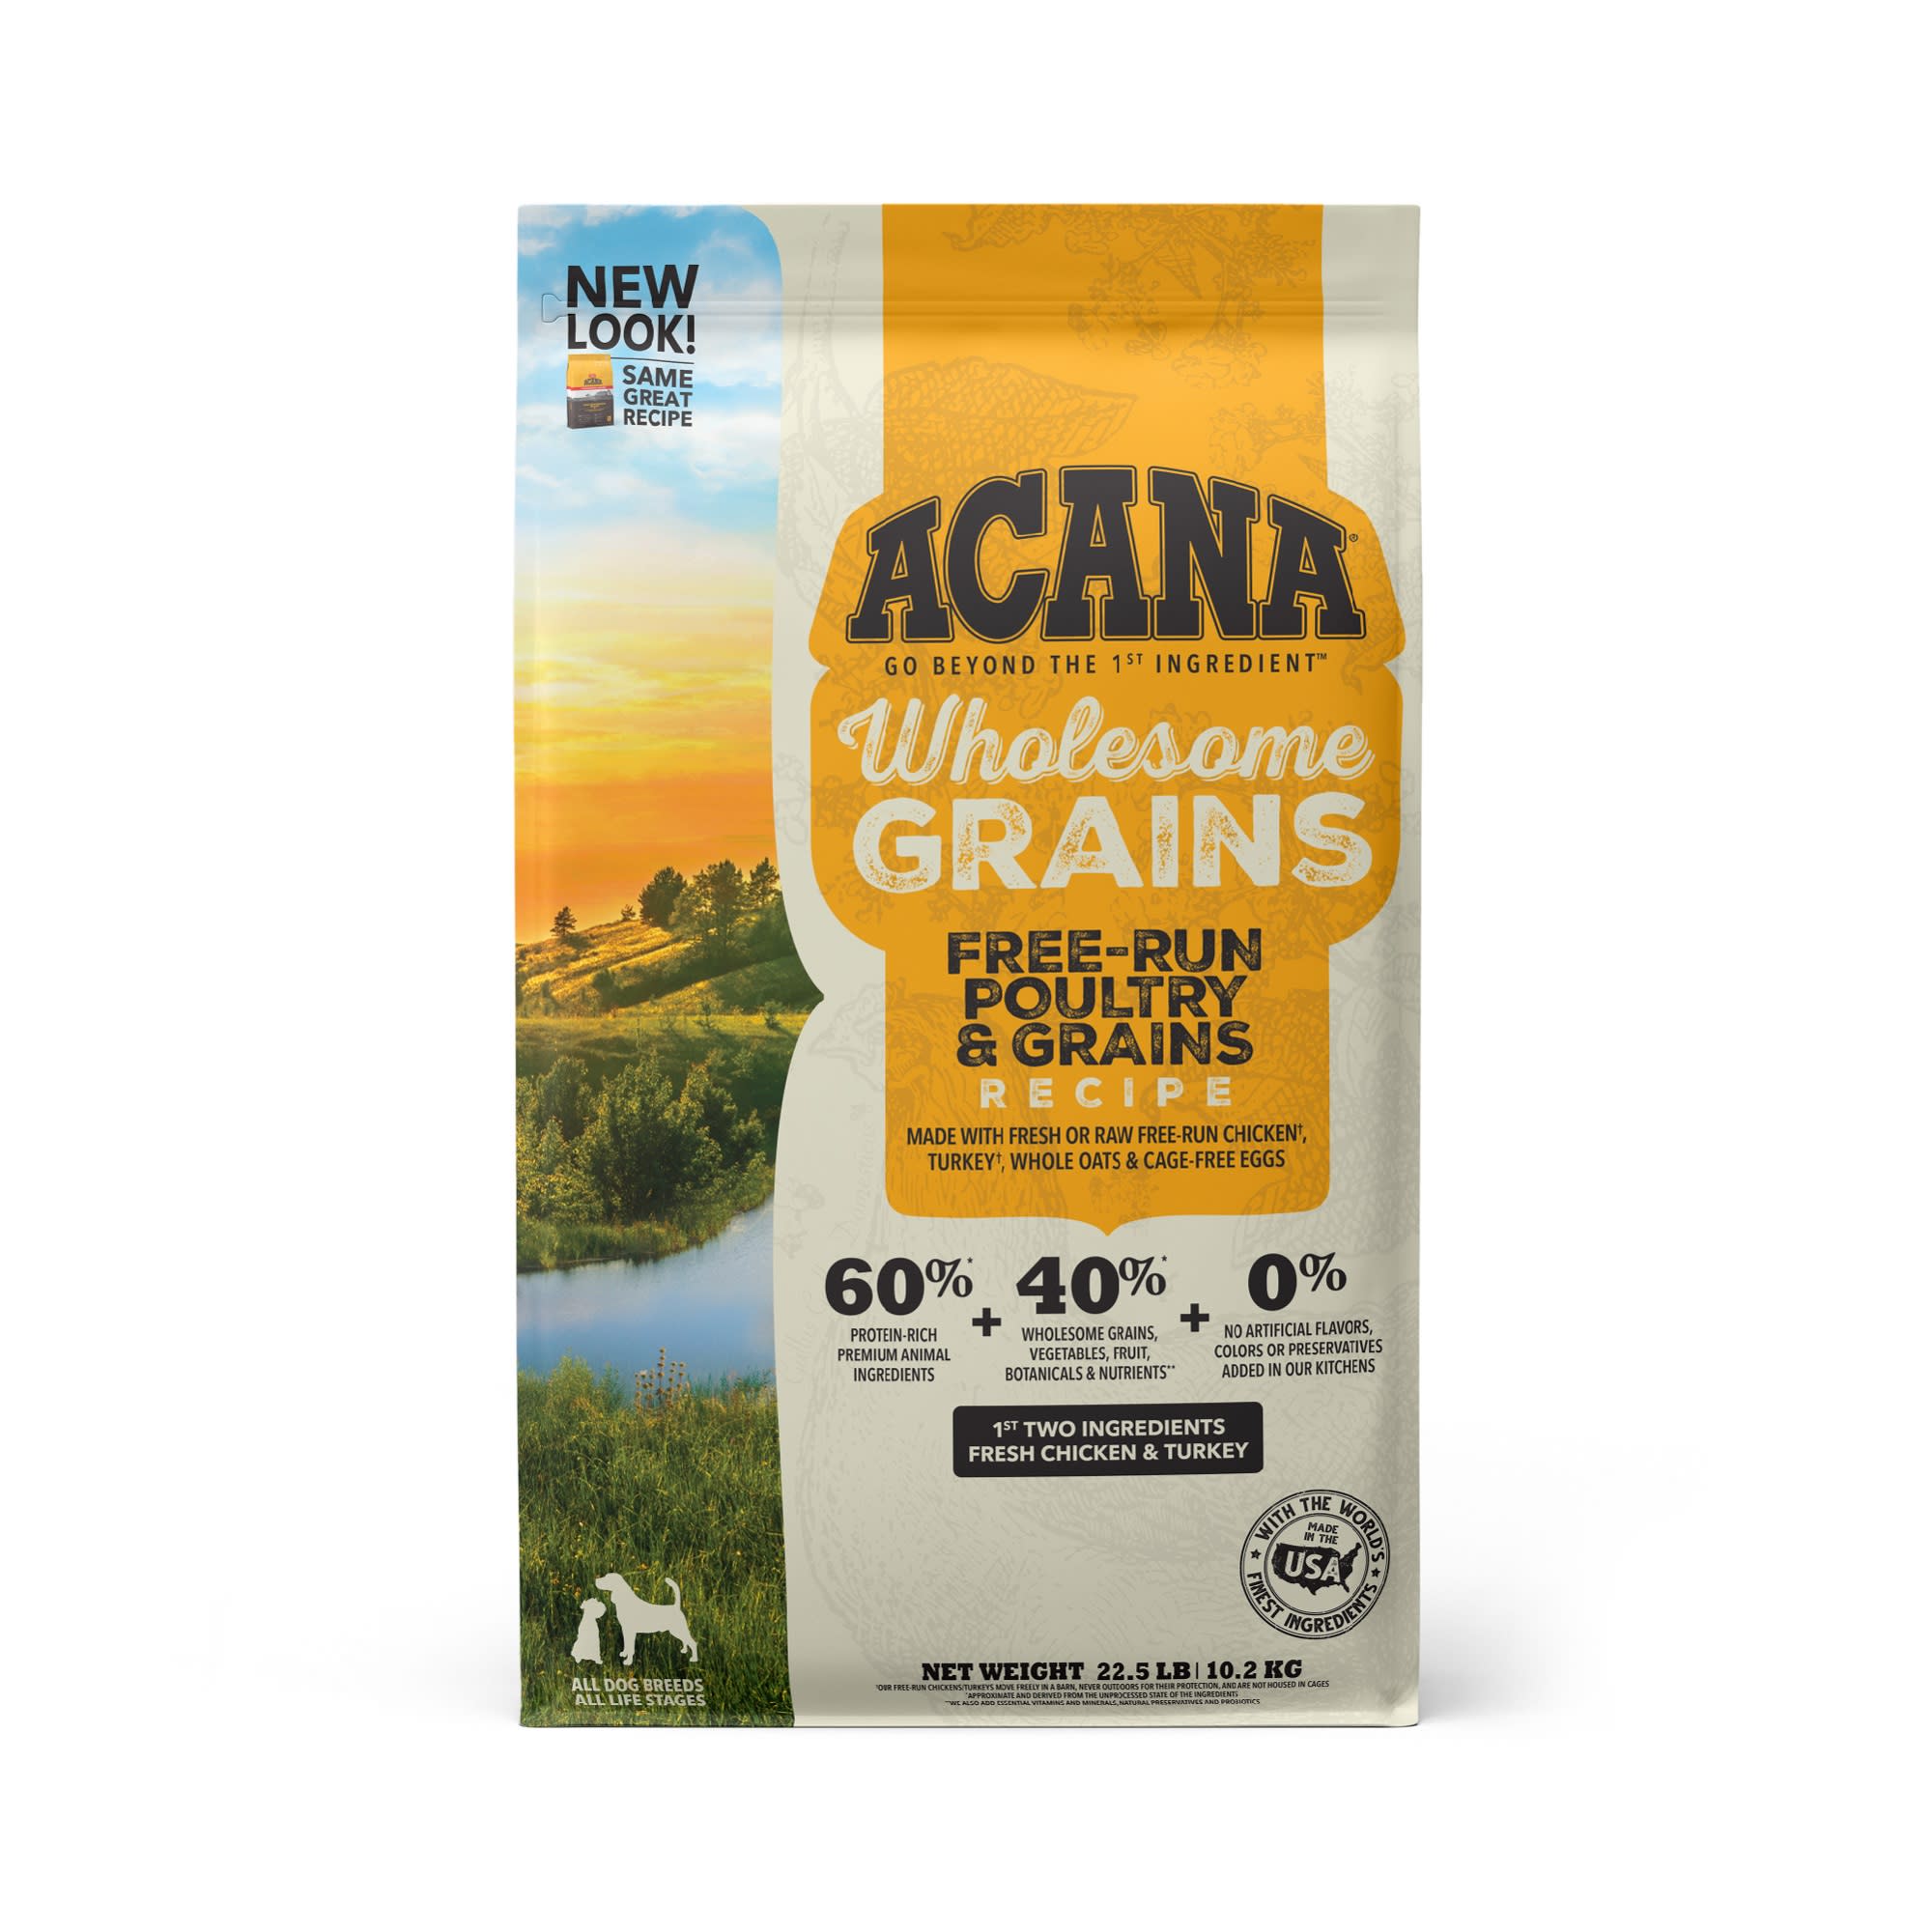 ACANA Wholesome Grains Free